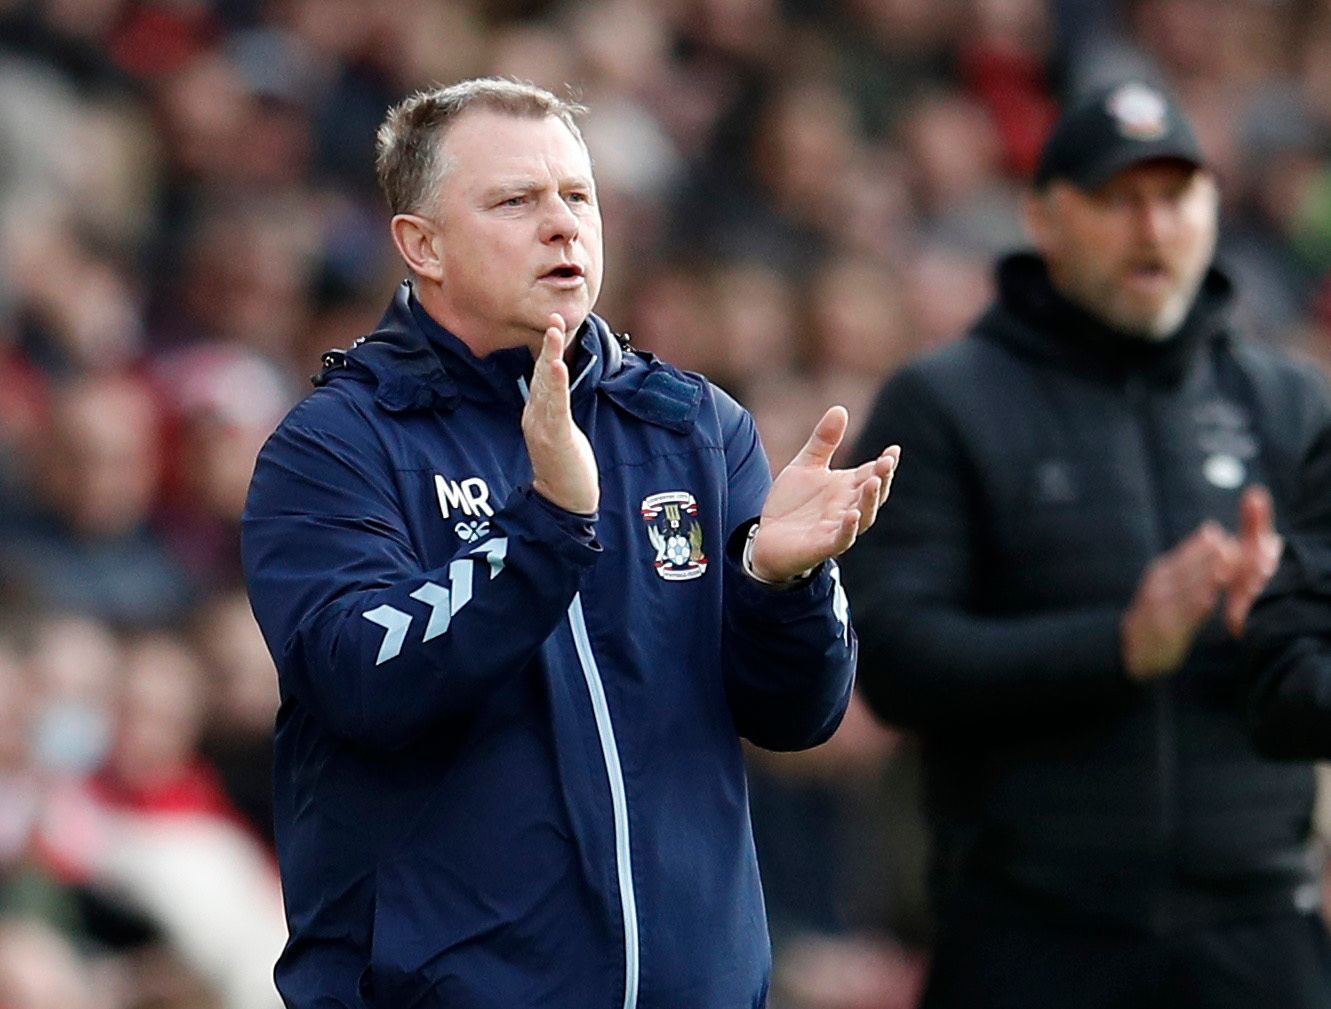 Soccer Football - FA Cup - Fourth Round - Southampton v Coventry City - St Mary's Stadium, Southampton, Britain - February 5, 2022 Coventry City manager Mark Robins REUTERS/Peter Nicholls